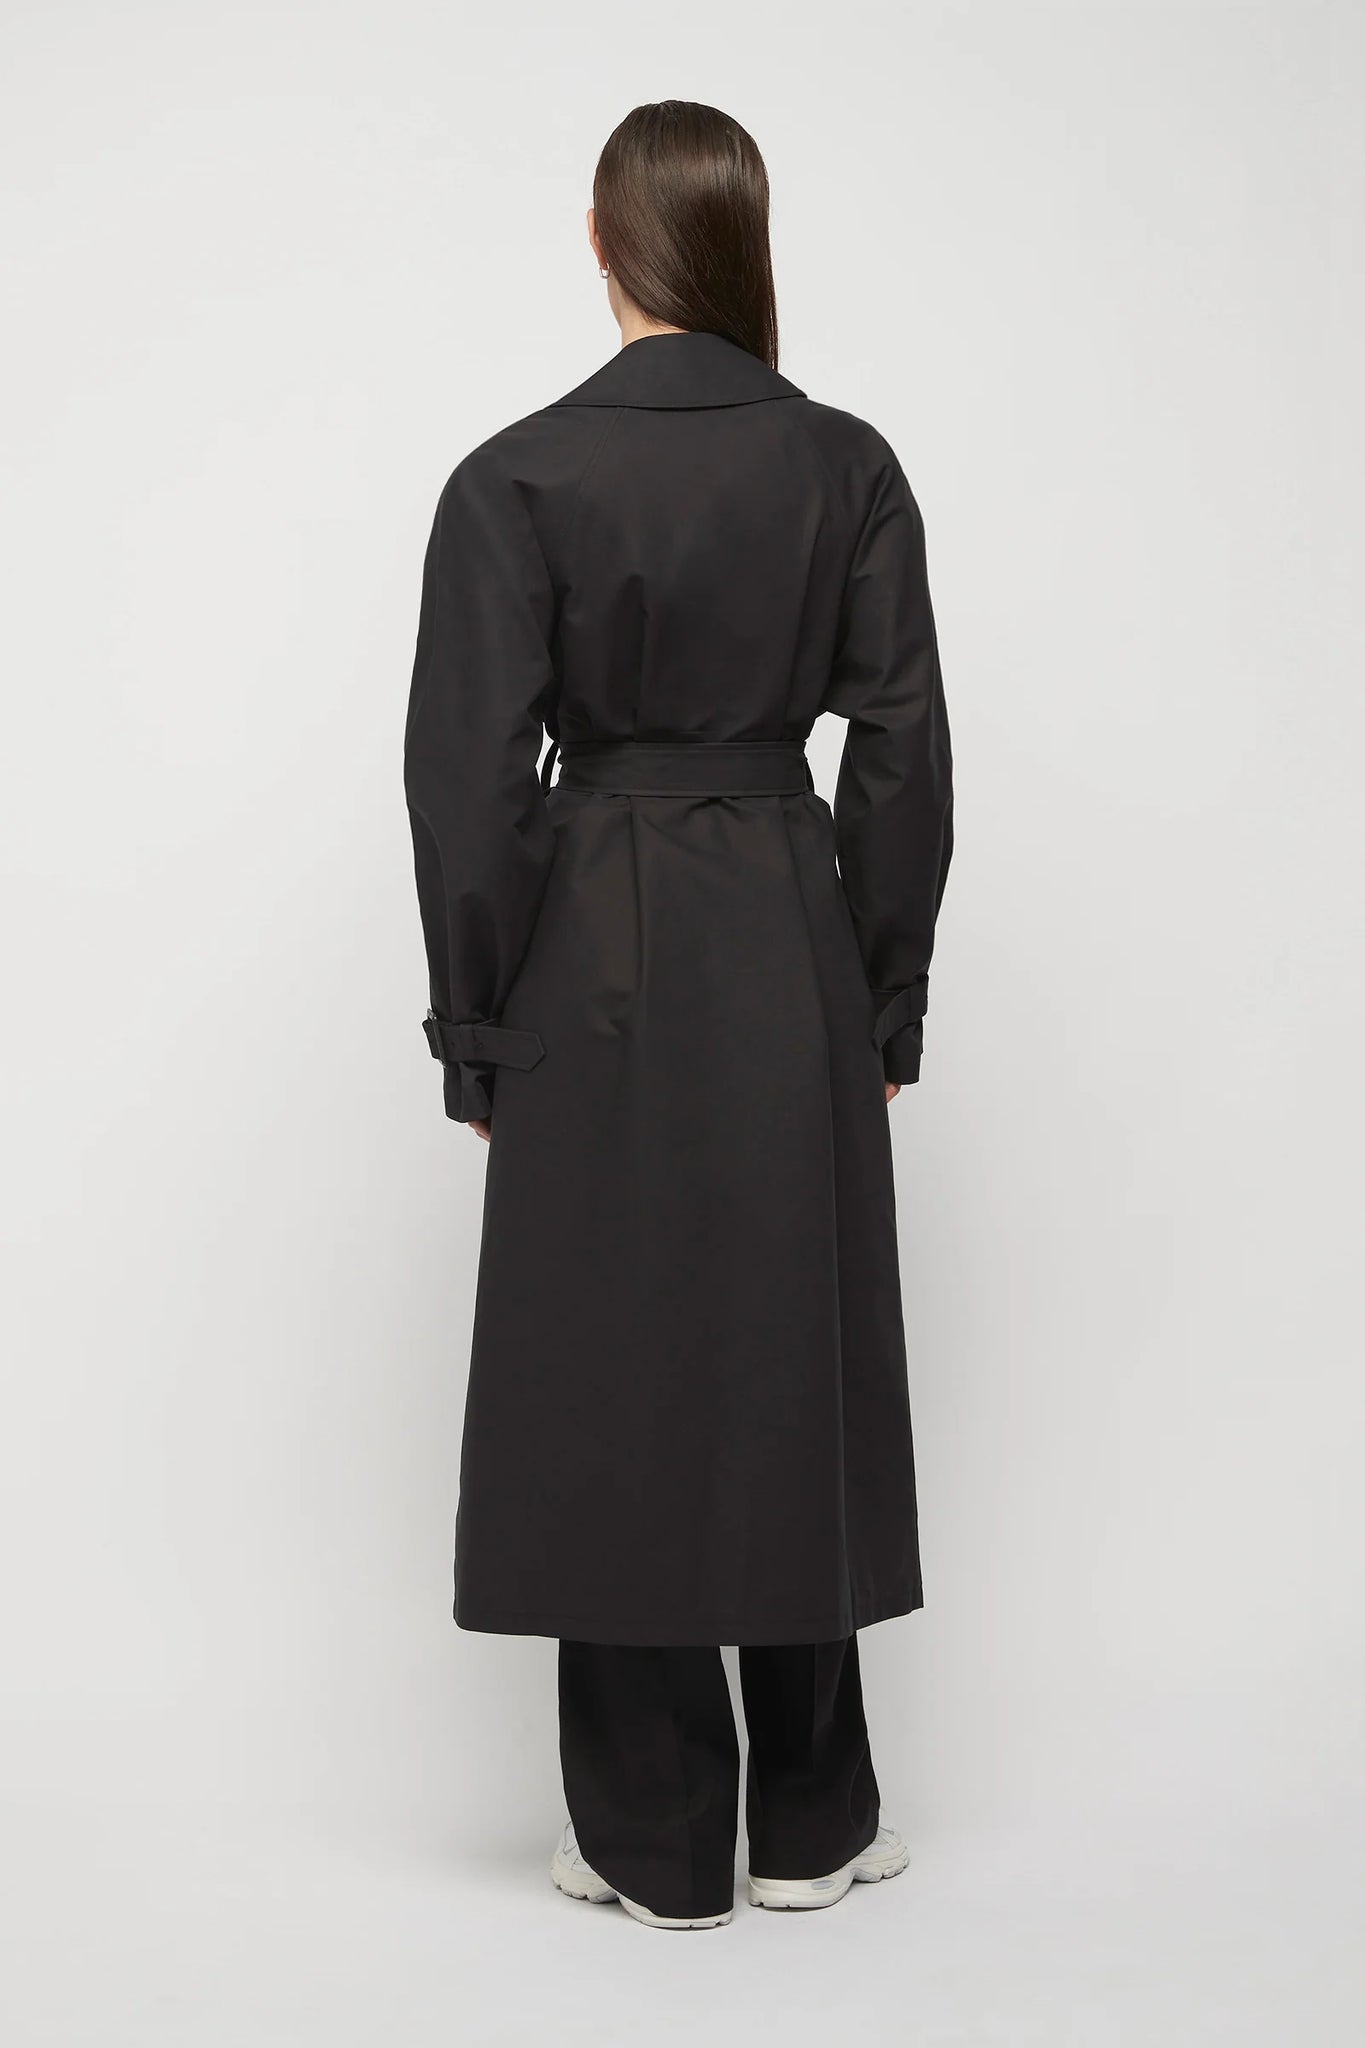 Friend of Audrey Browne Oversized Trench Coat - Black